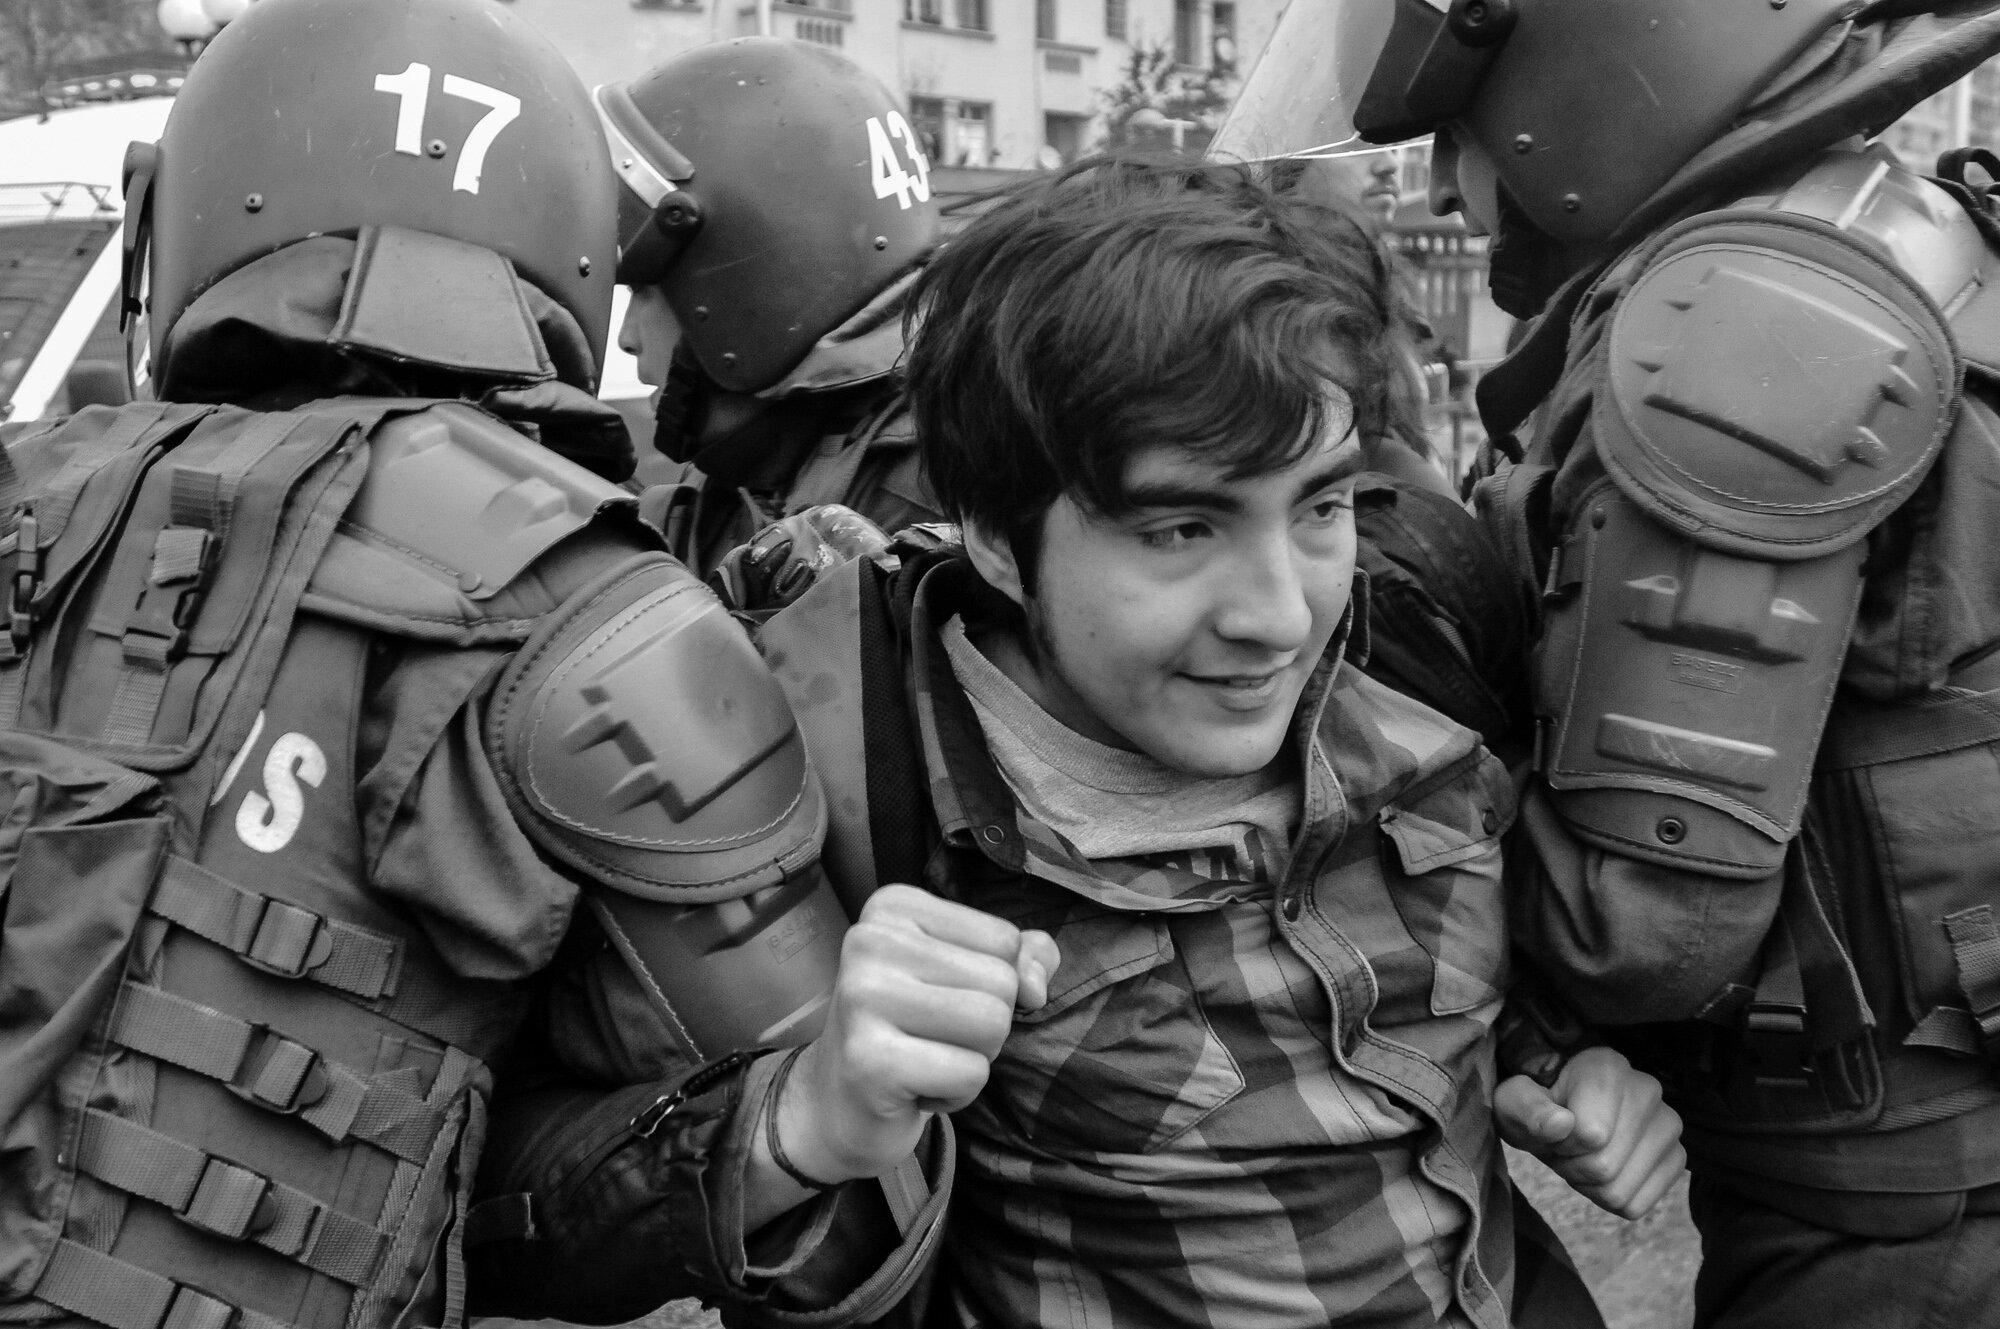 Chilean_student_protests-12.jpg